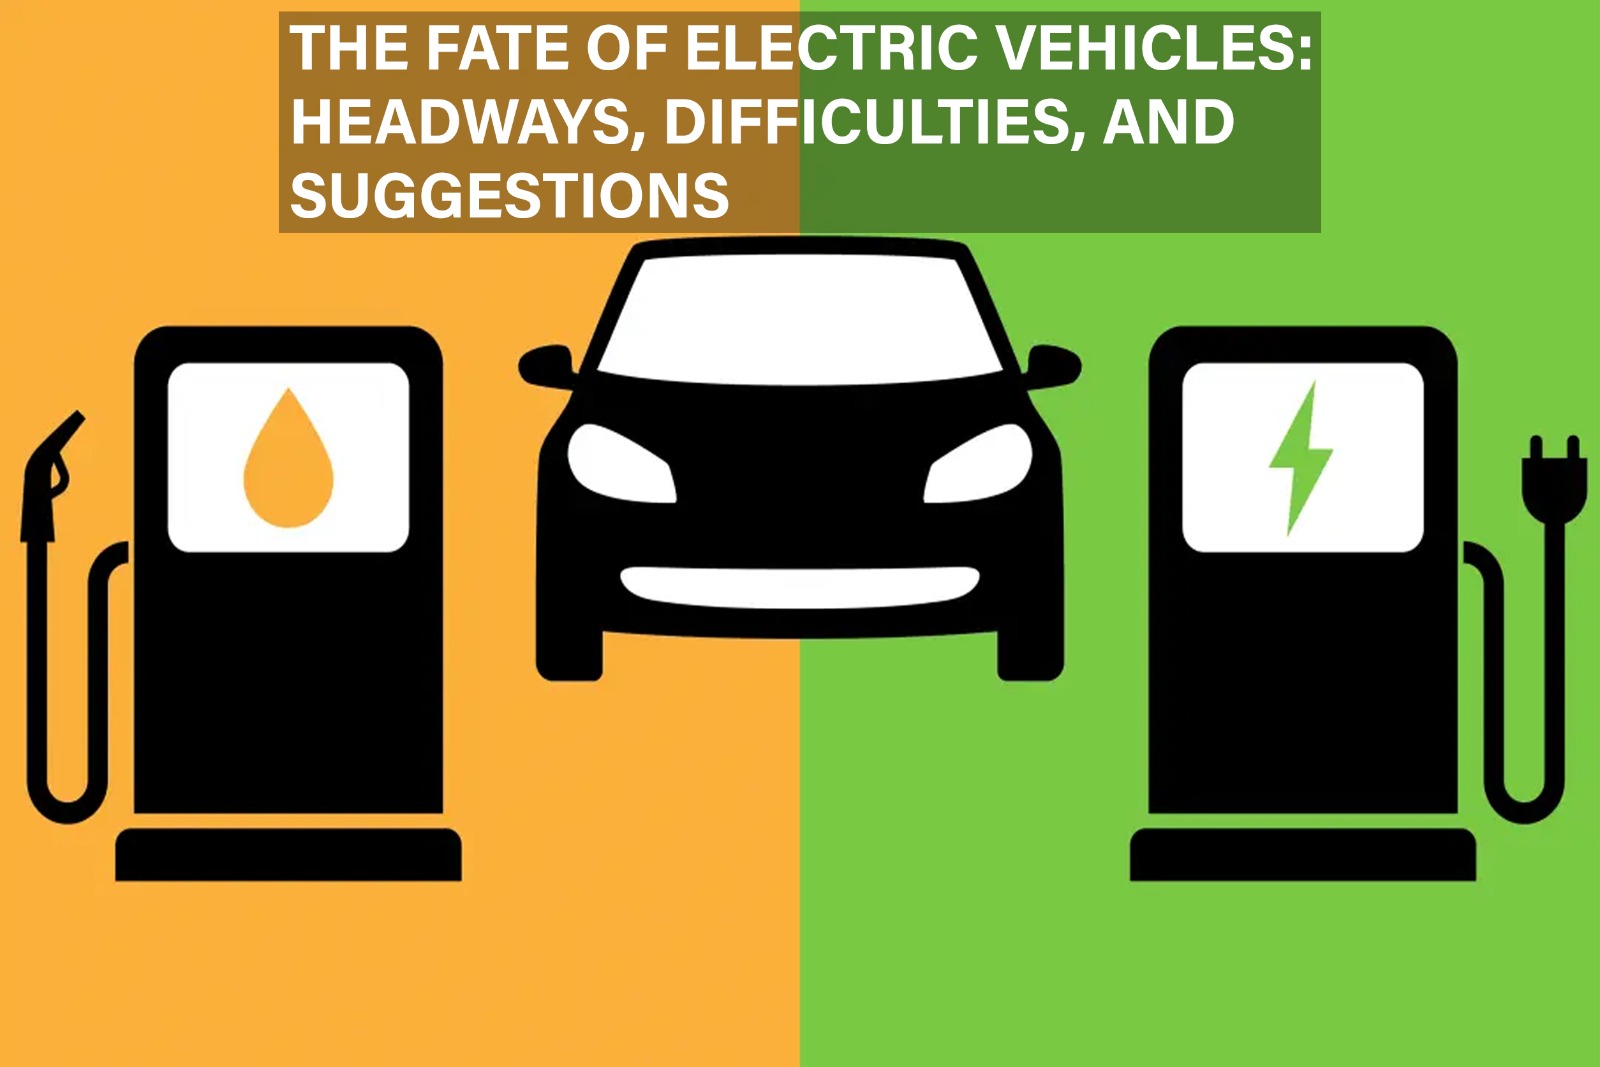 The Fate of Electric Vehicles: Headways, Difficulties, and Suggestions